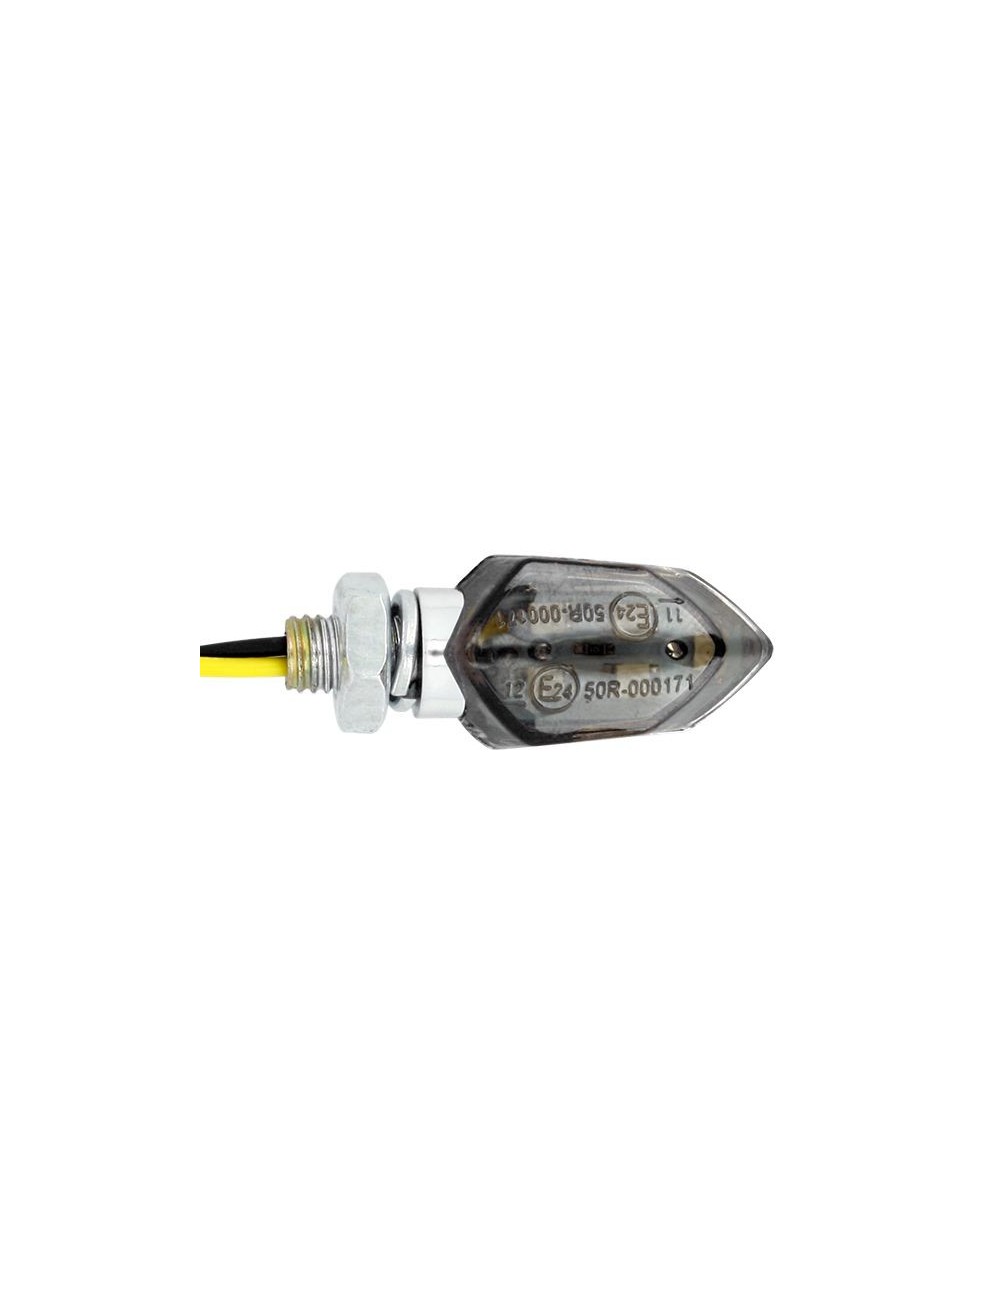 LED Sifam Micro clignotants Universels a LED - Homologues CE - Chrome/fumes